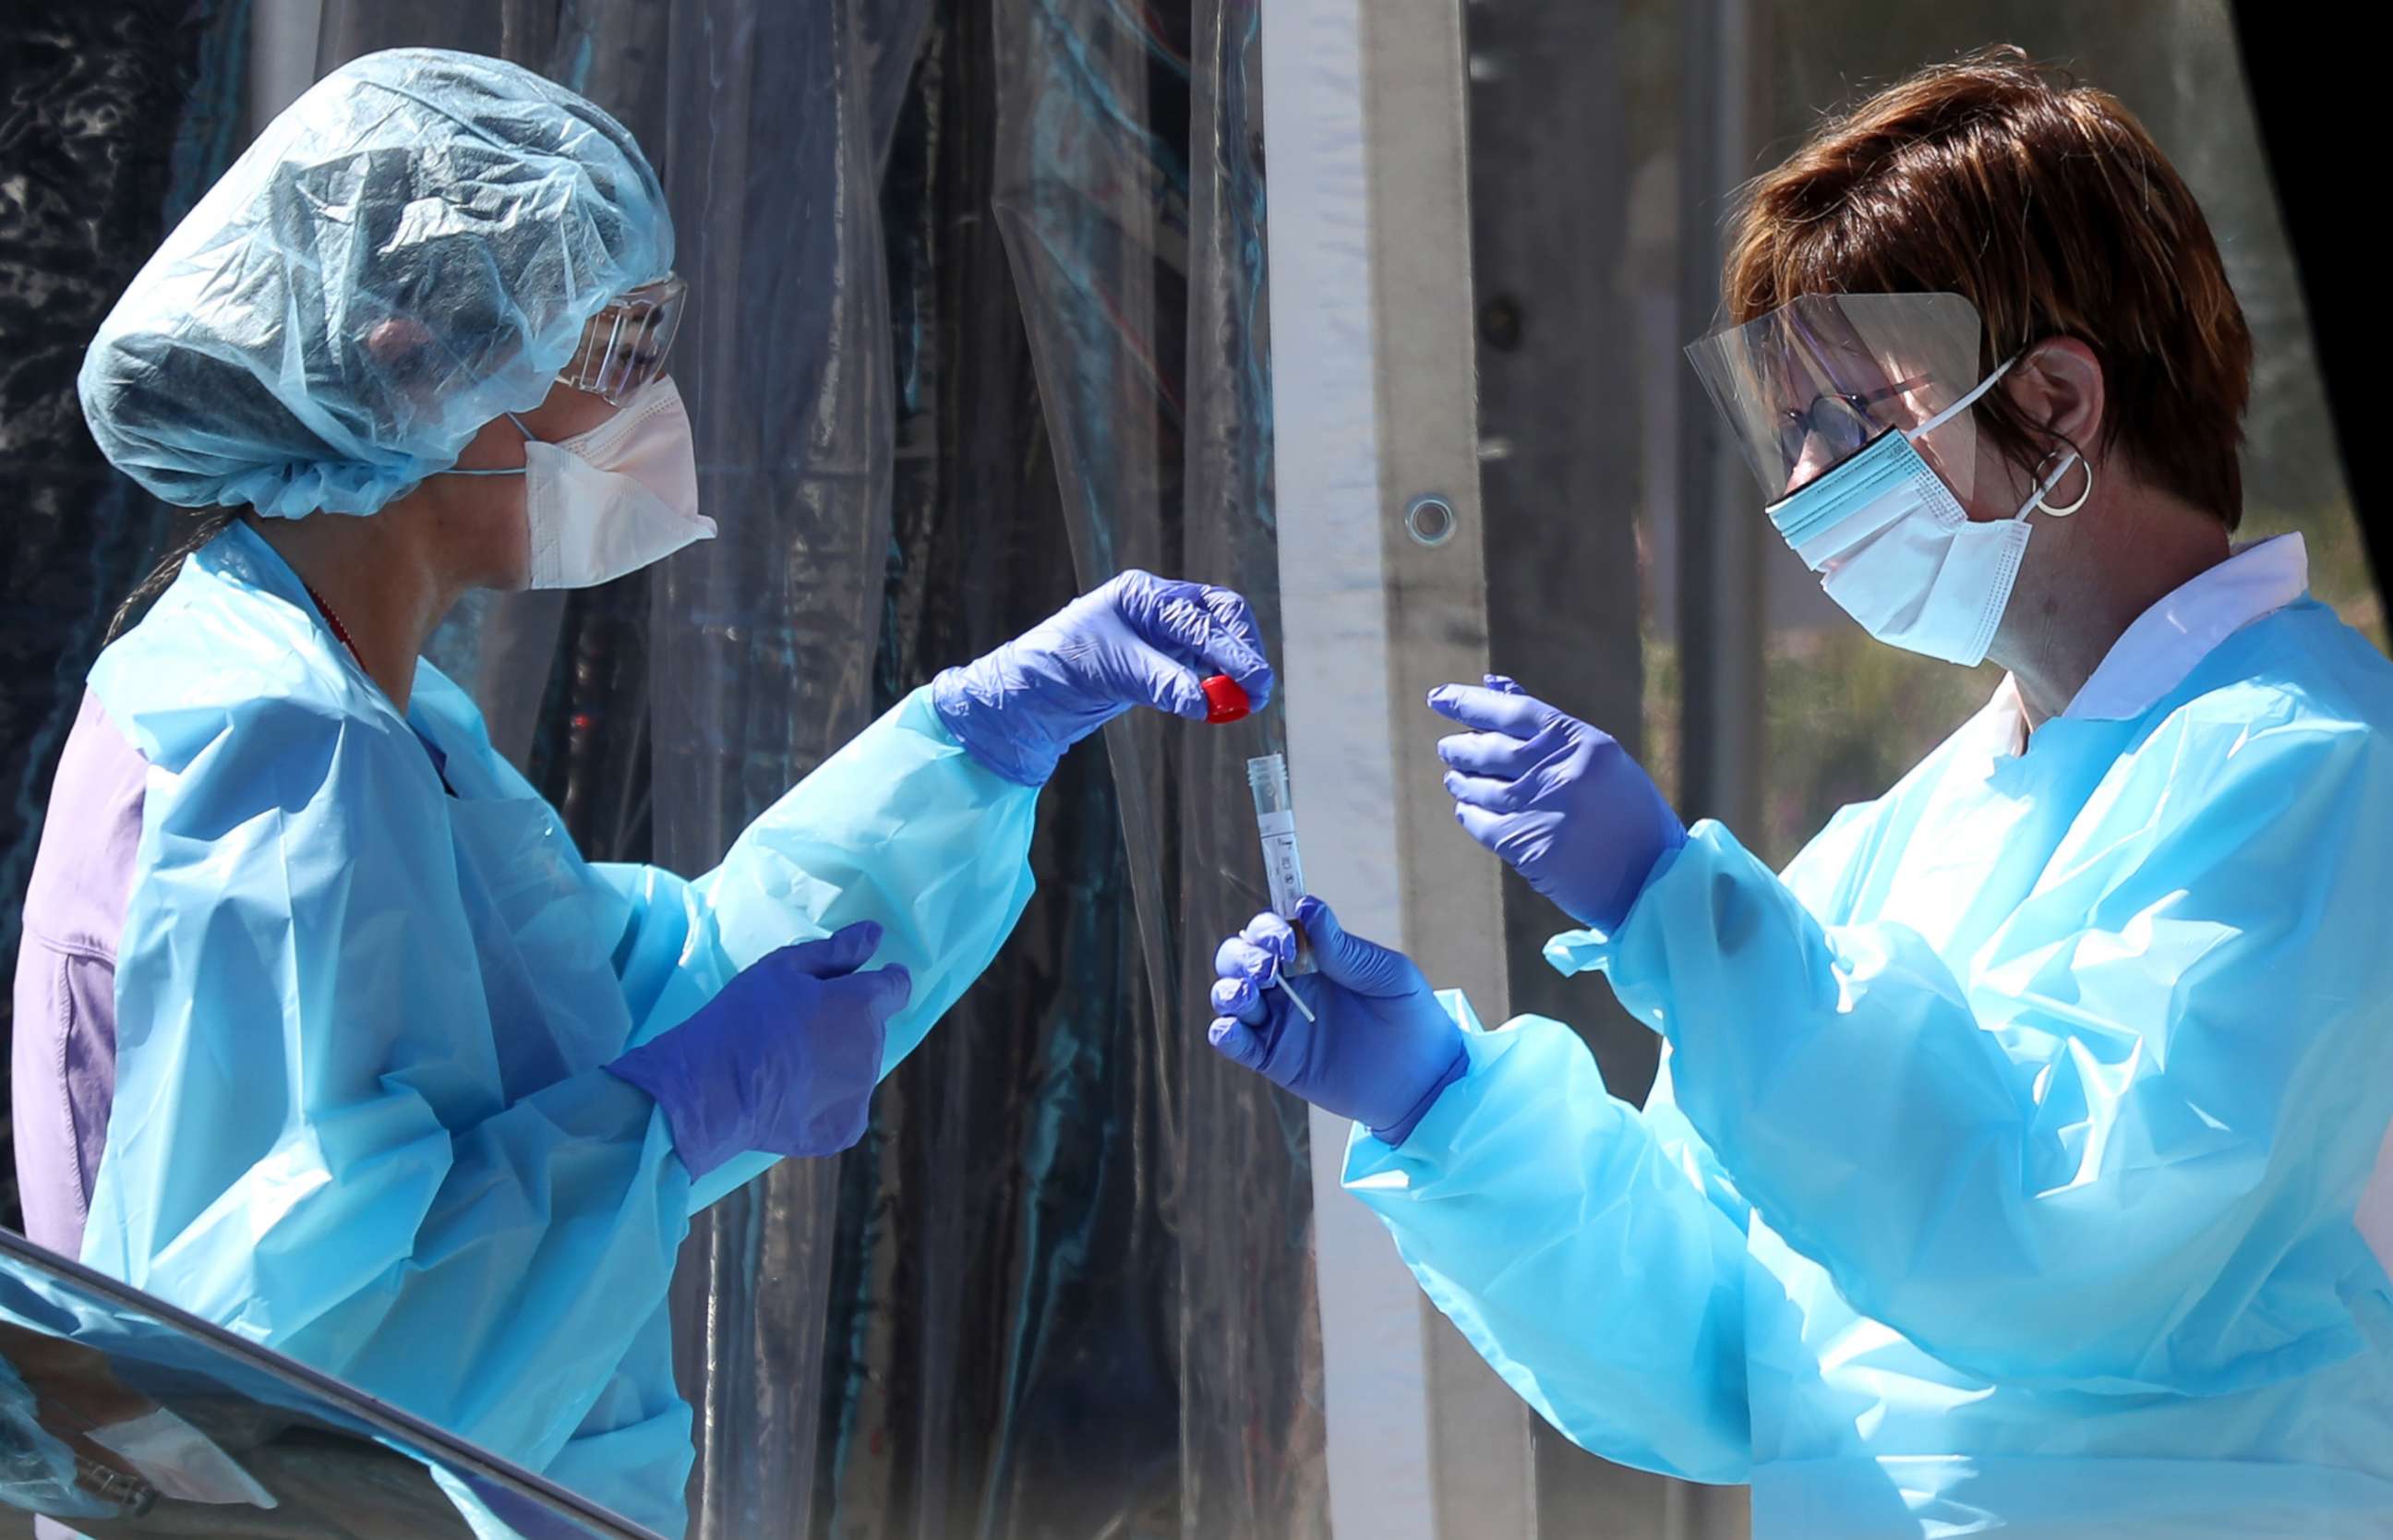 PHOTO: Medical personnel secure a sample from a person at a drive-thru Coronavirus COVID-19 testing station at a Kaiser Permanente facility, March 12, 2020 in San Francisco.